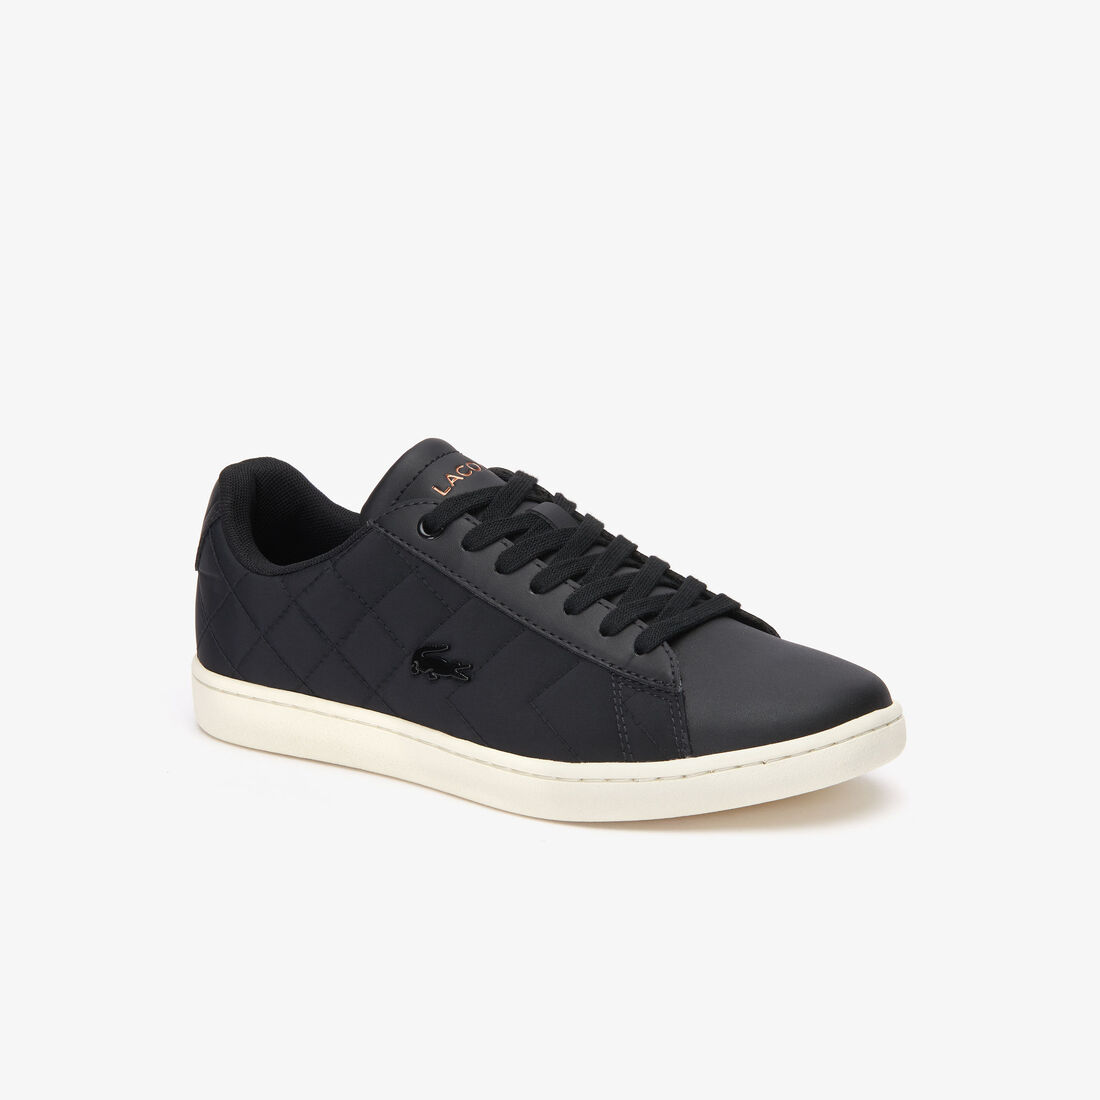 Women's Carnaby Evo Textile Trainers